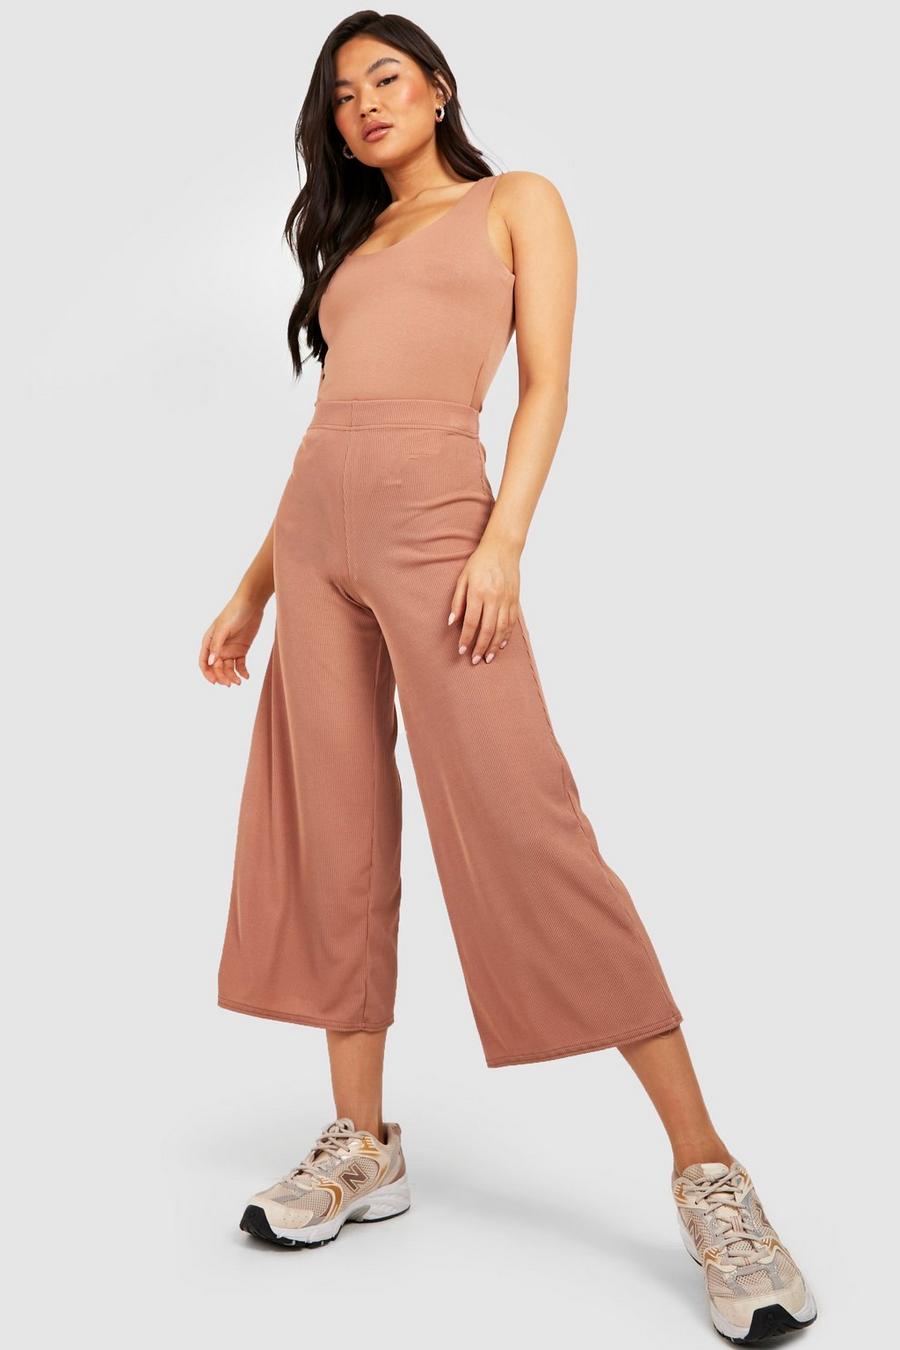 Fawn beige Basic Ribbed High Waisted Culotte Pants